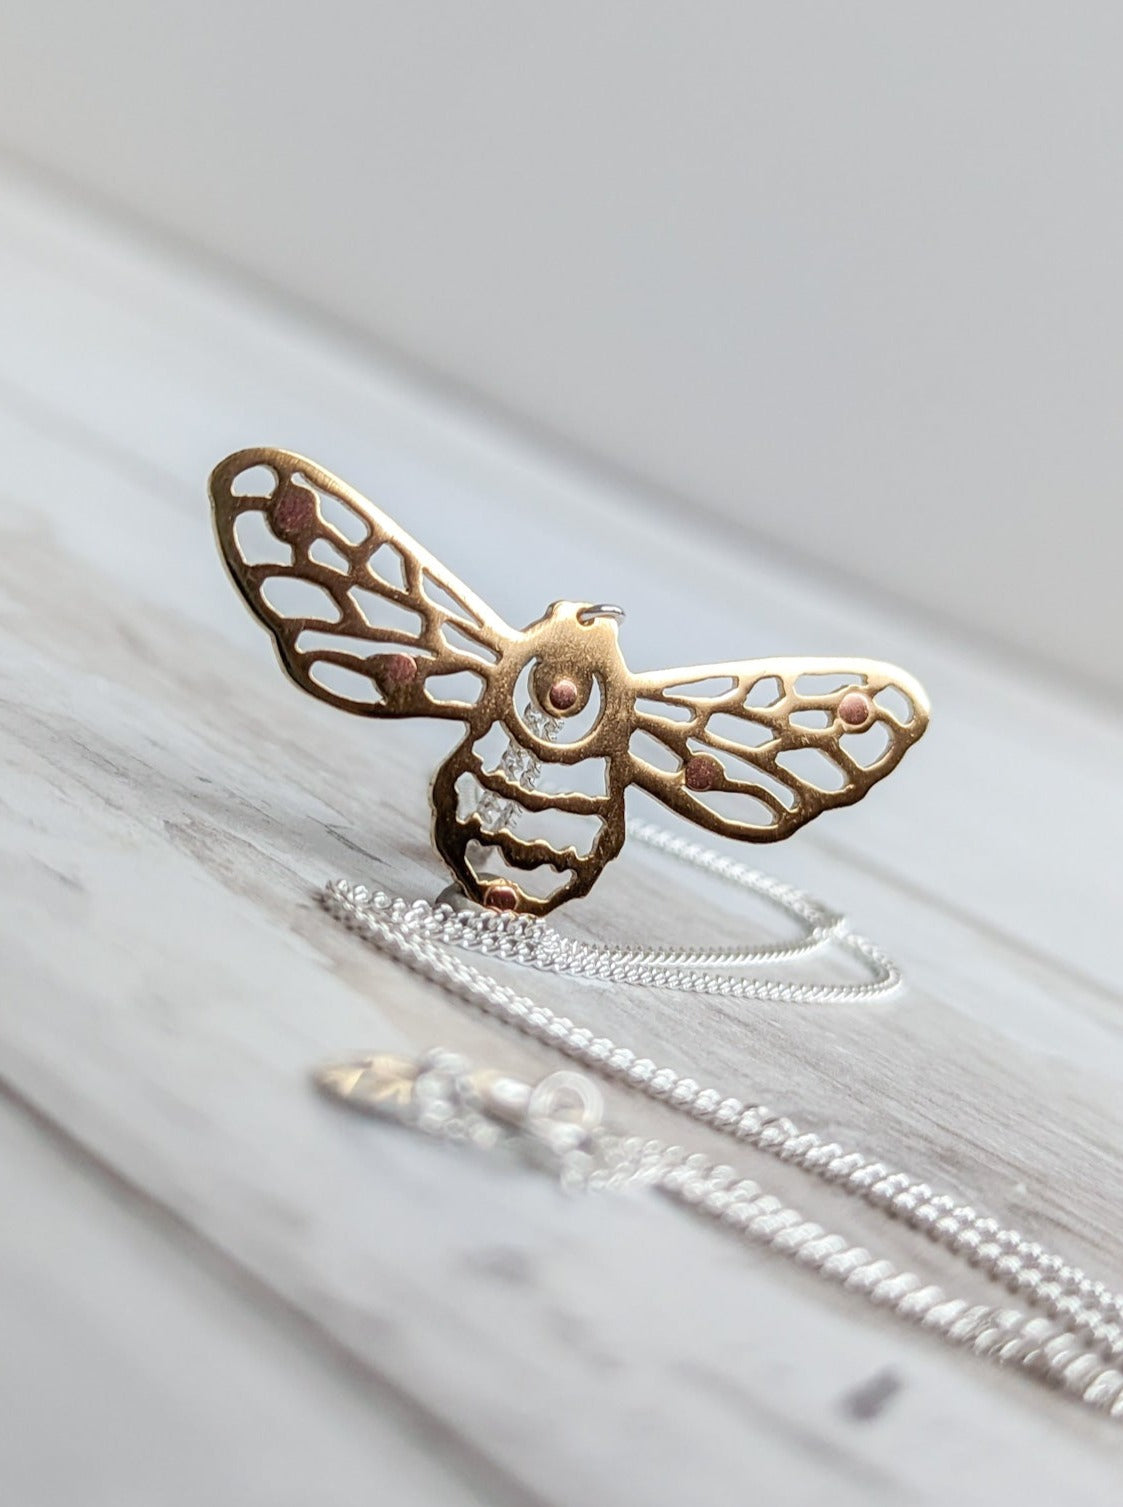 Cut-out brass bee pendant